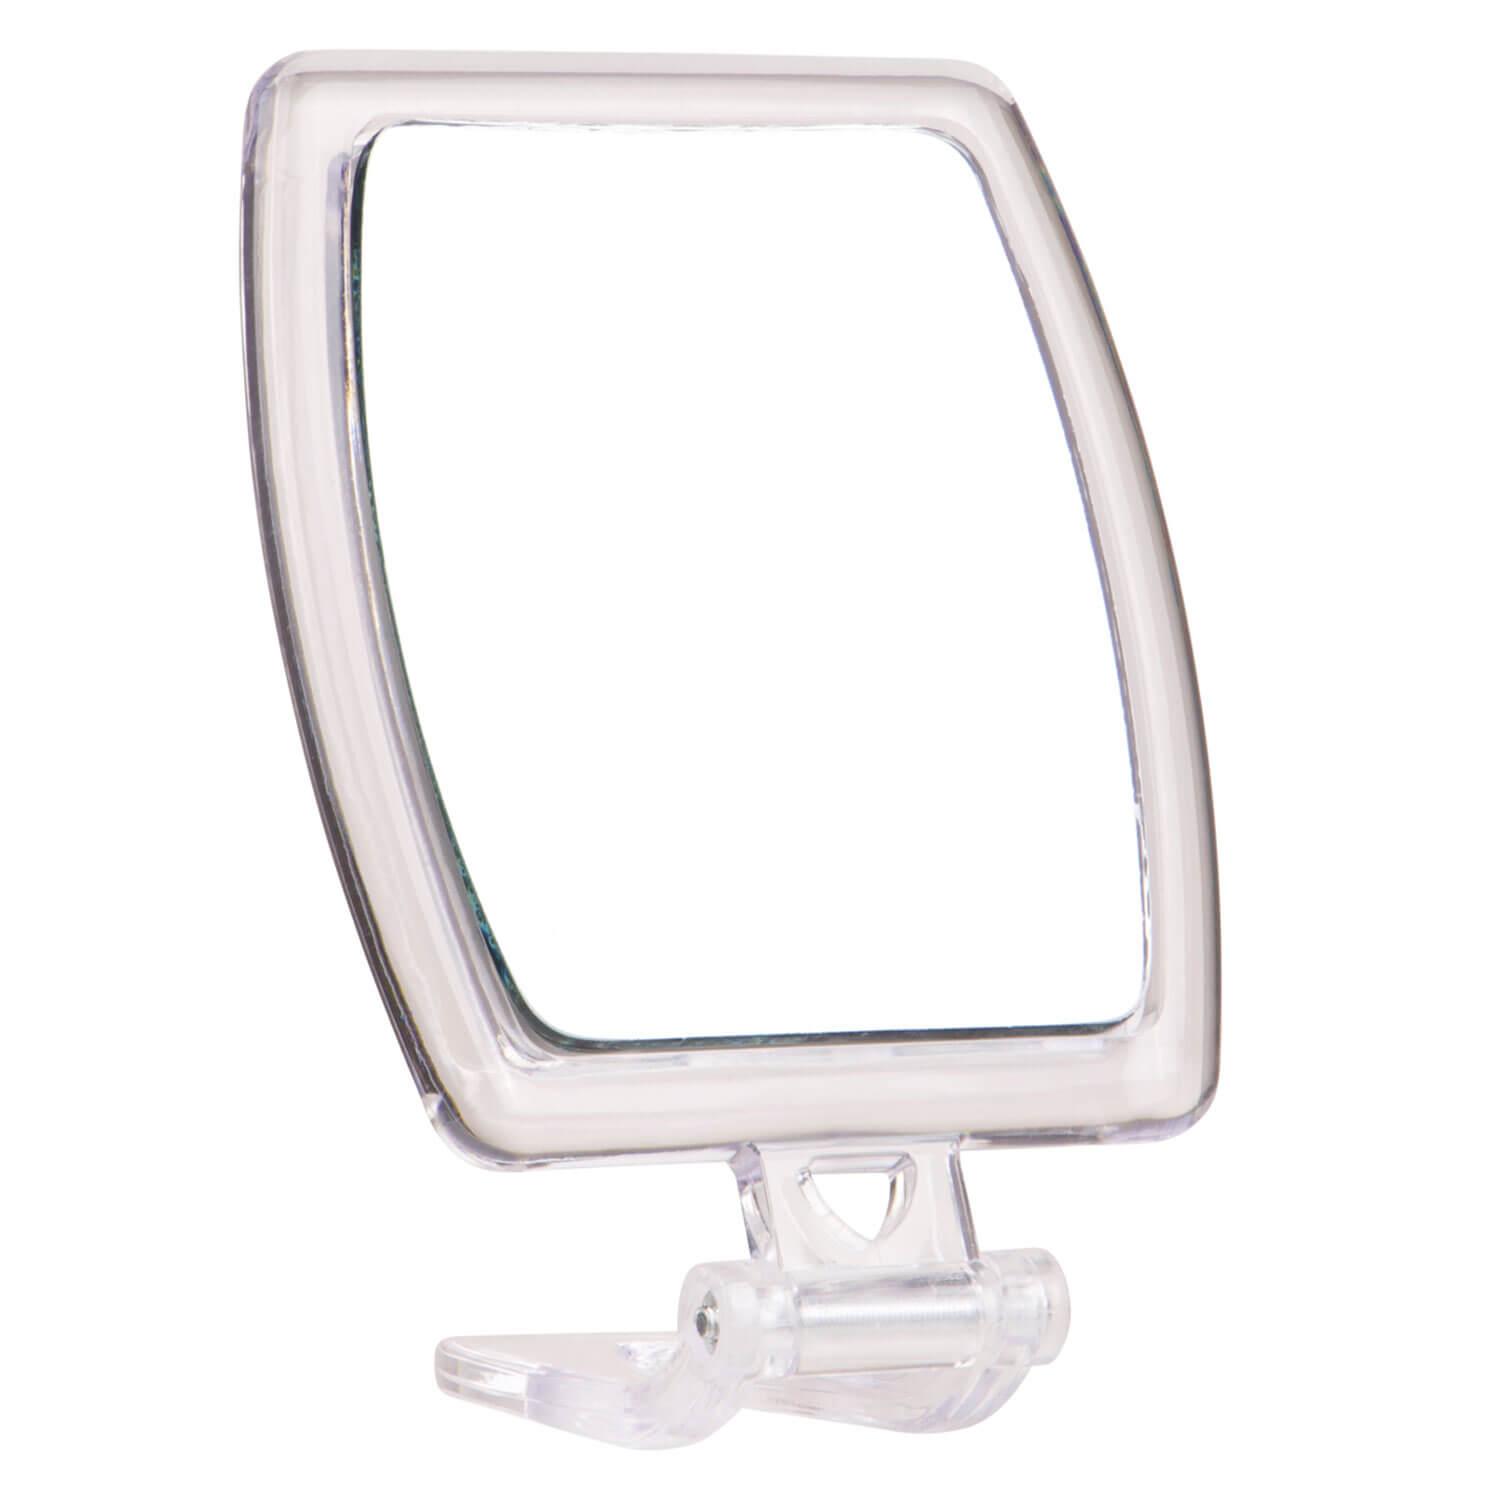 TRISA Beauty - Adjustable Mirror x1 and x5